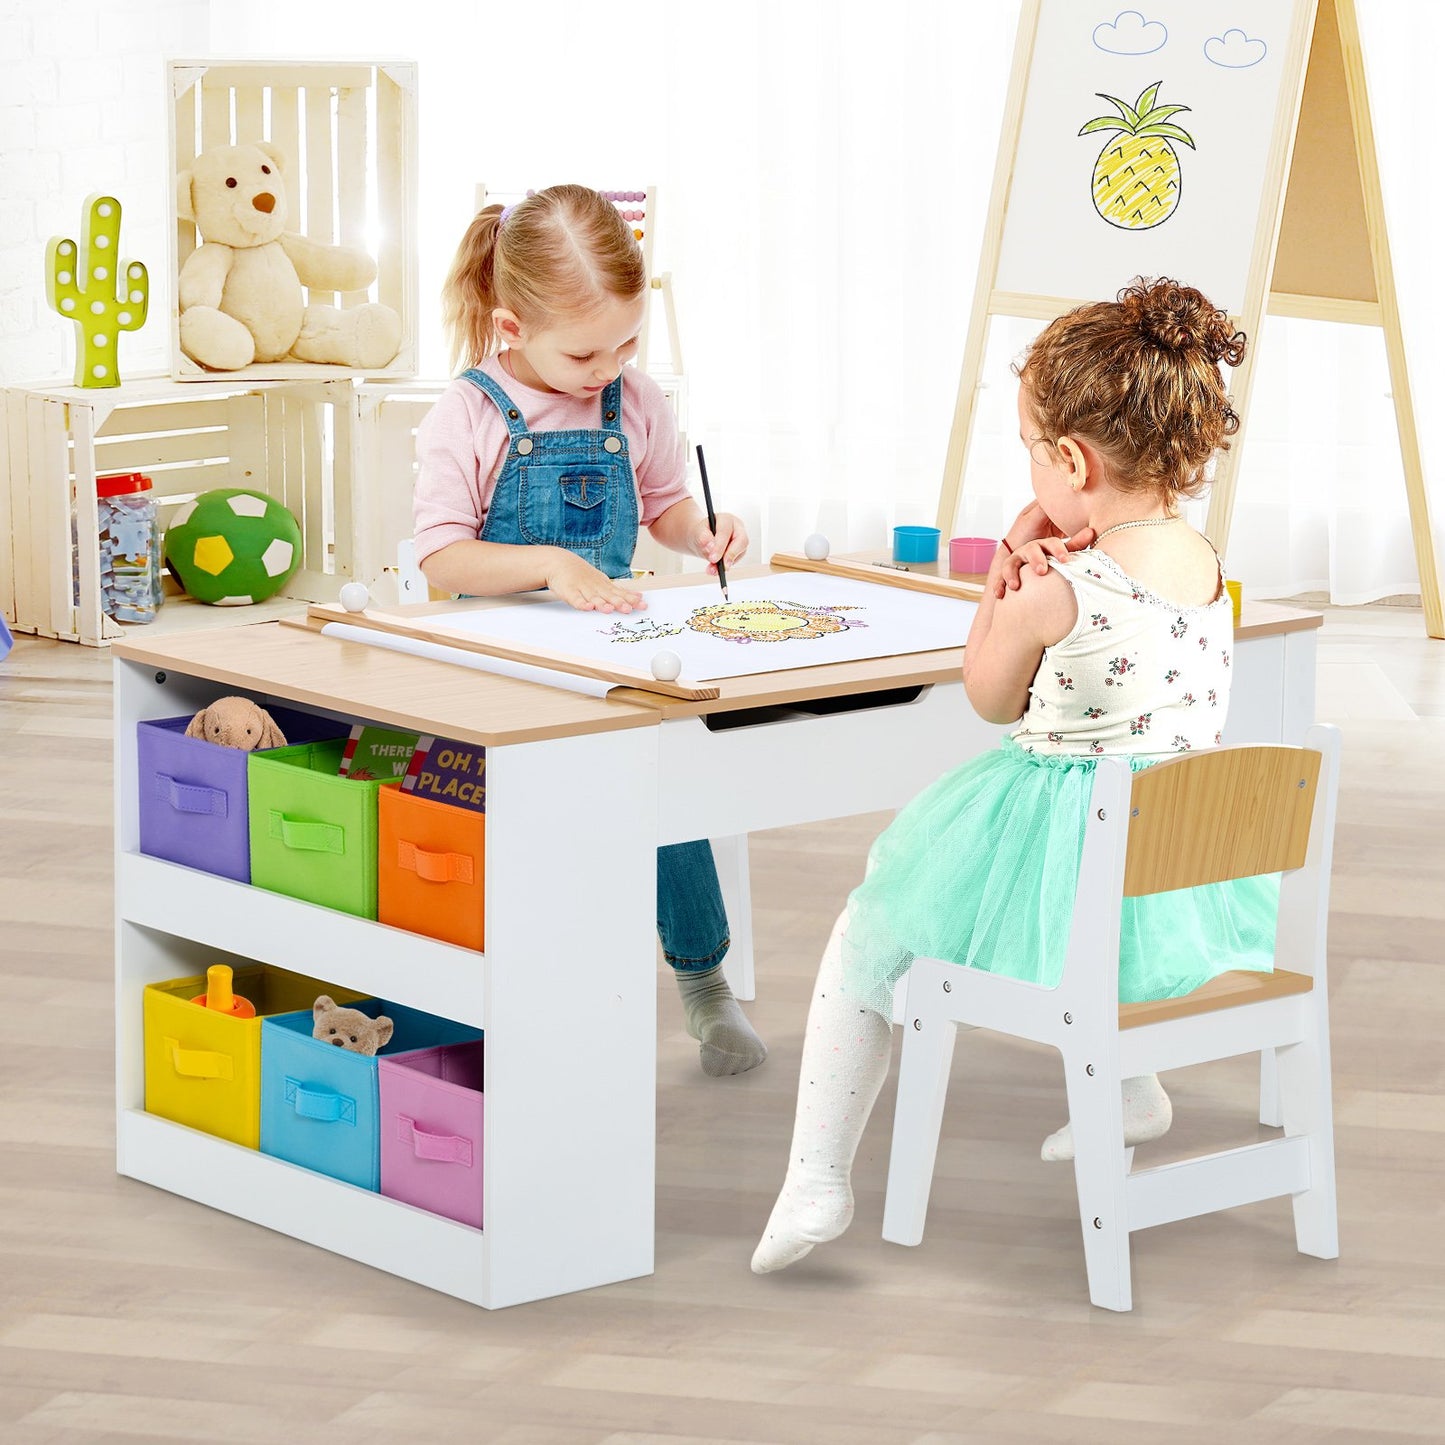 Children Art Activity Table and Drawing Table, Natural